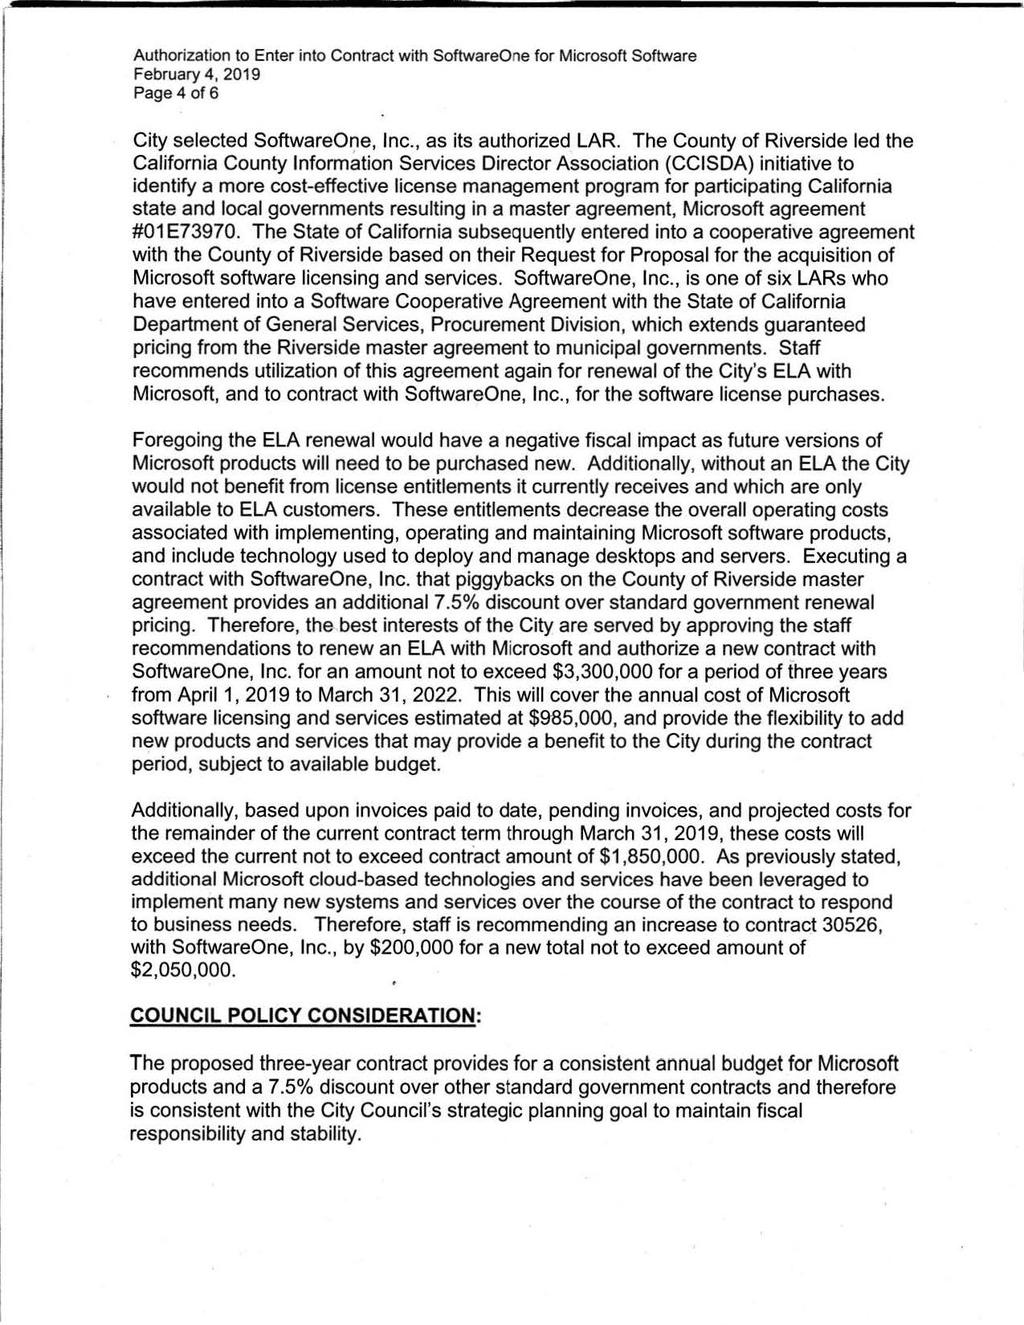 Page 4 of 6 City selected SoftwareOne, Inc., as its authorized LAR.